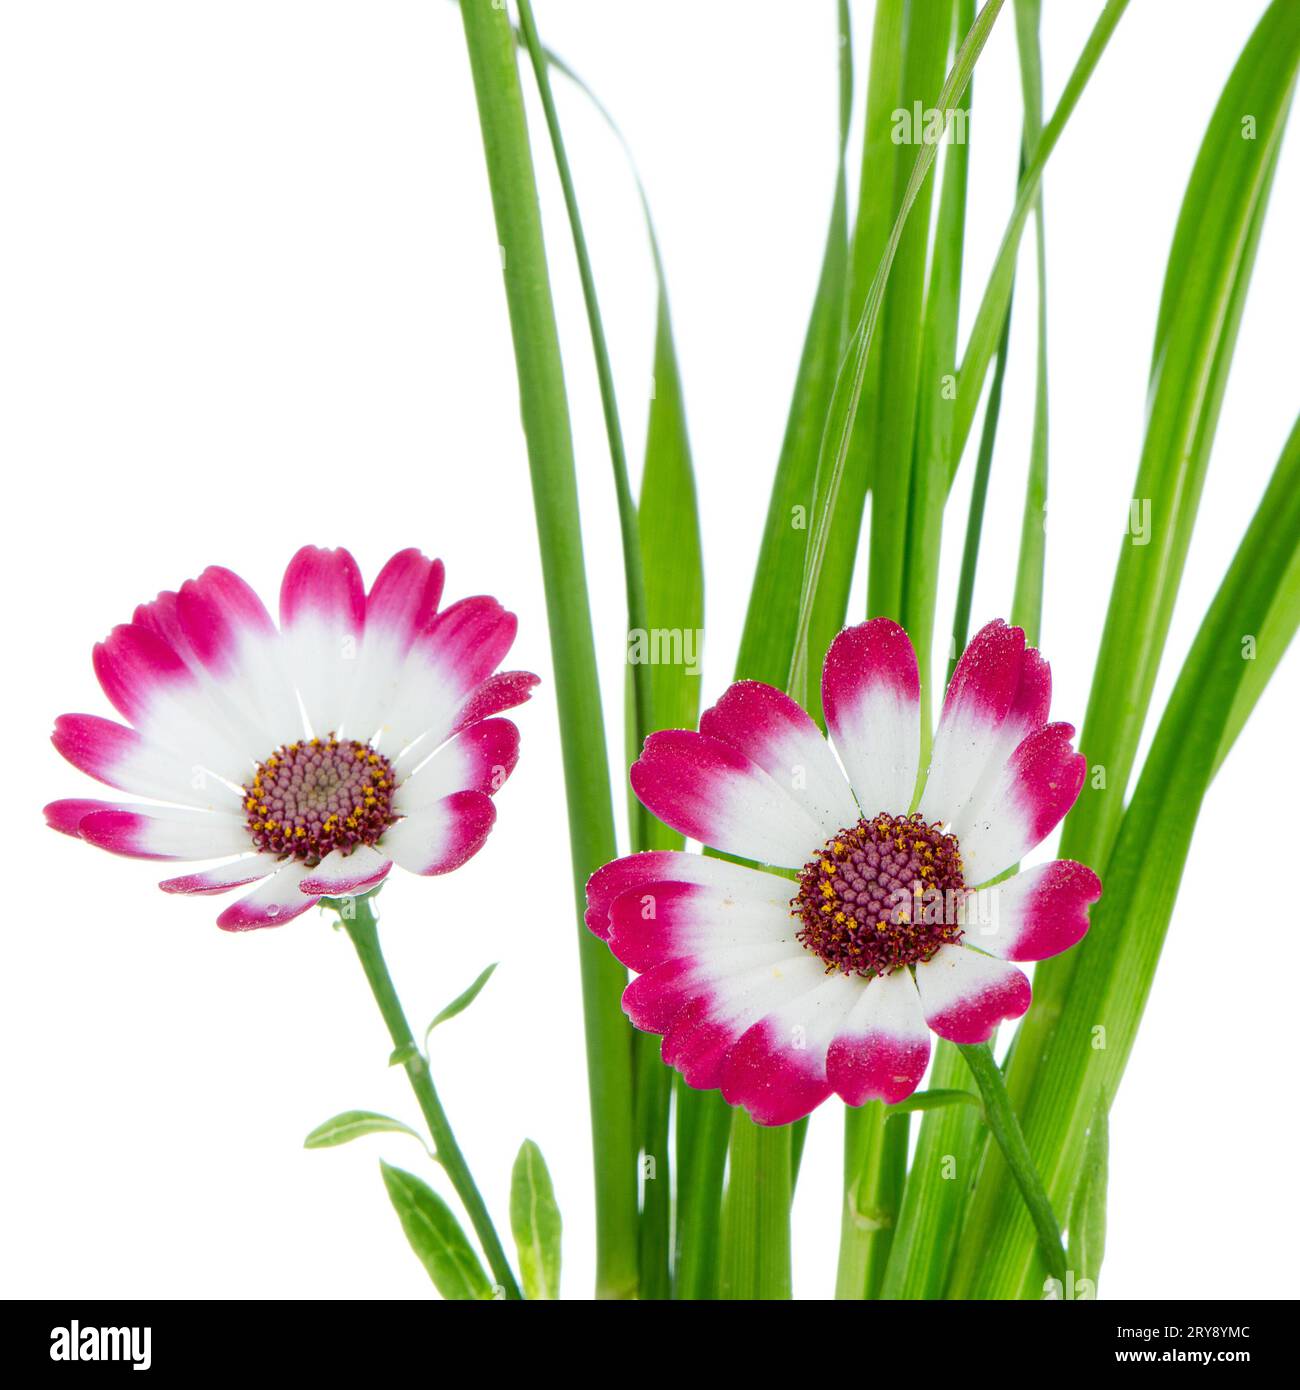 Beautiful pink flowers and green grass Stock Photo